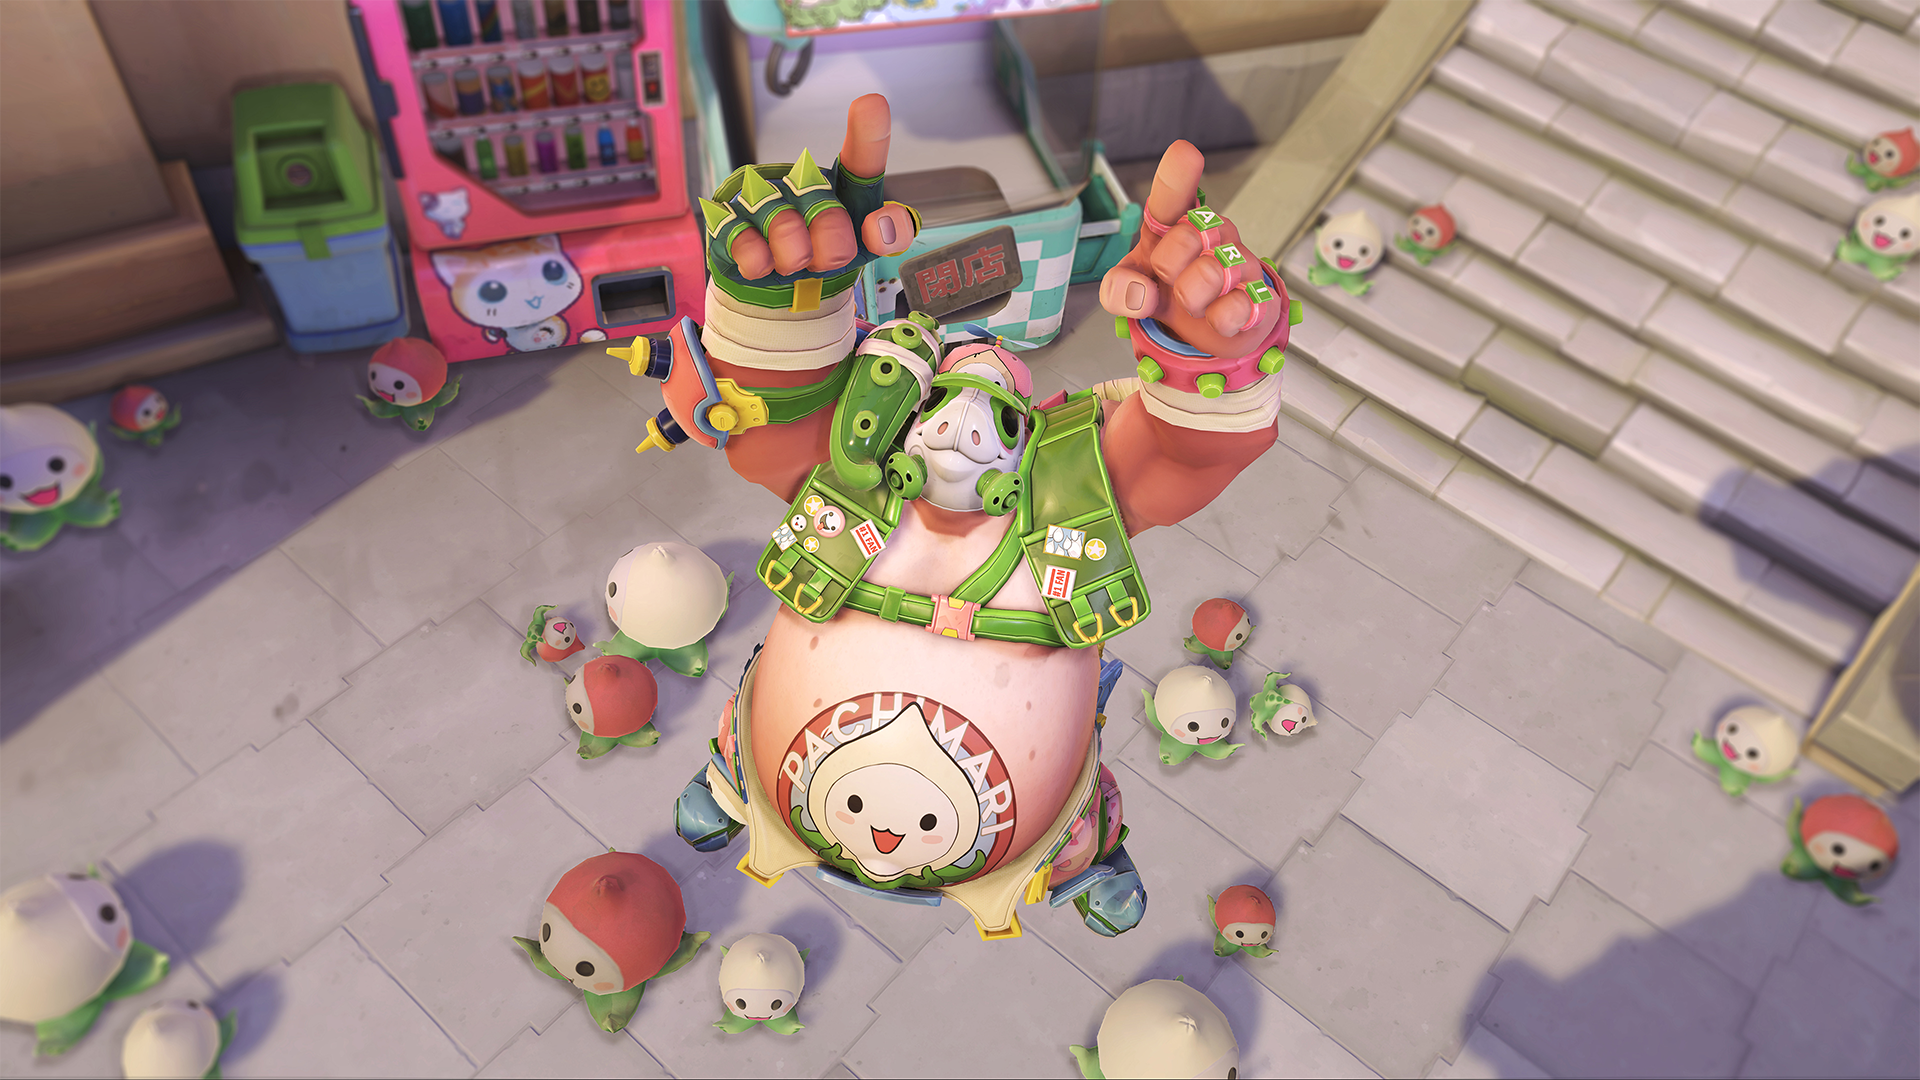 Pachimarchi roadhog surrounded by pachimaris pointing both index fingers upwards and looking up as well, standing on pavement with vending machines behind them.